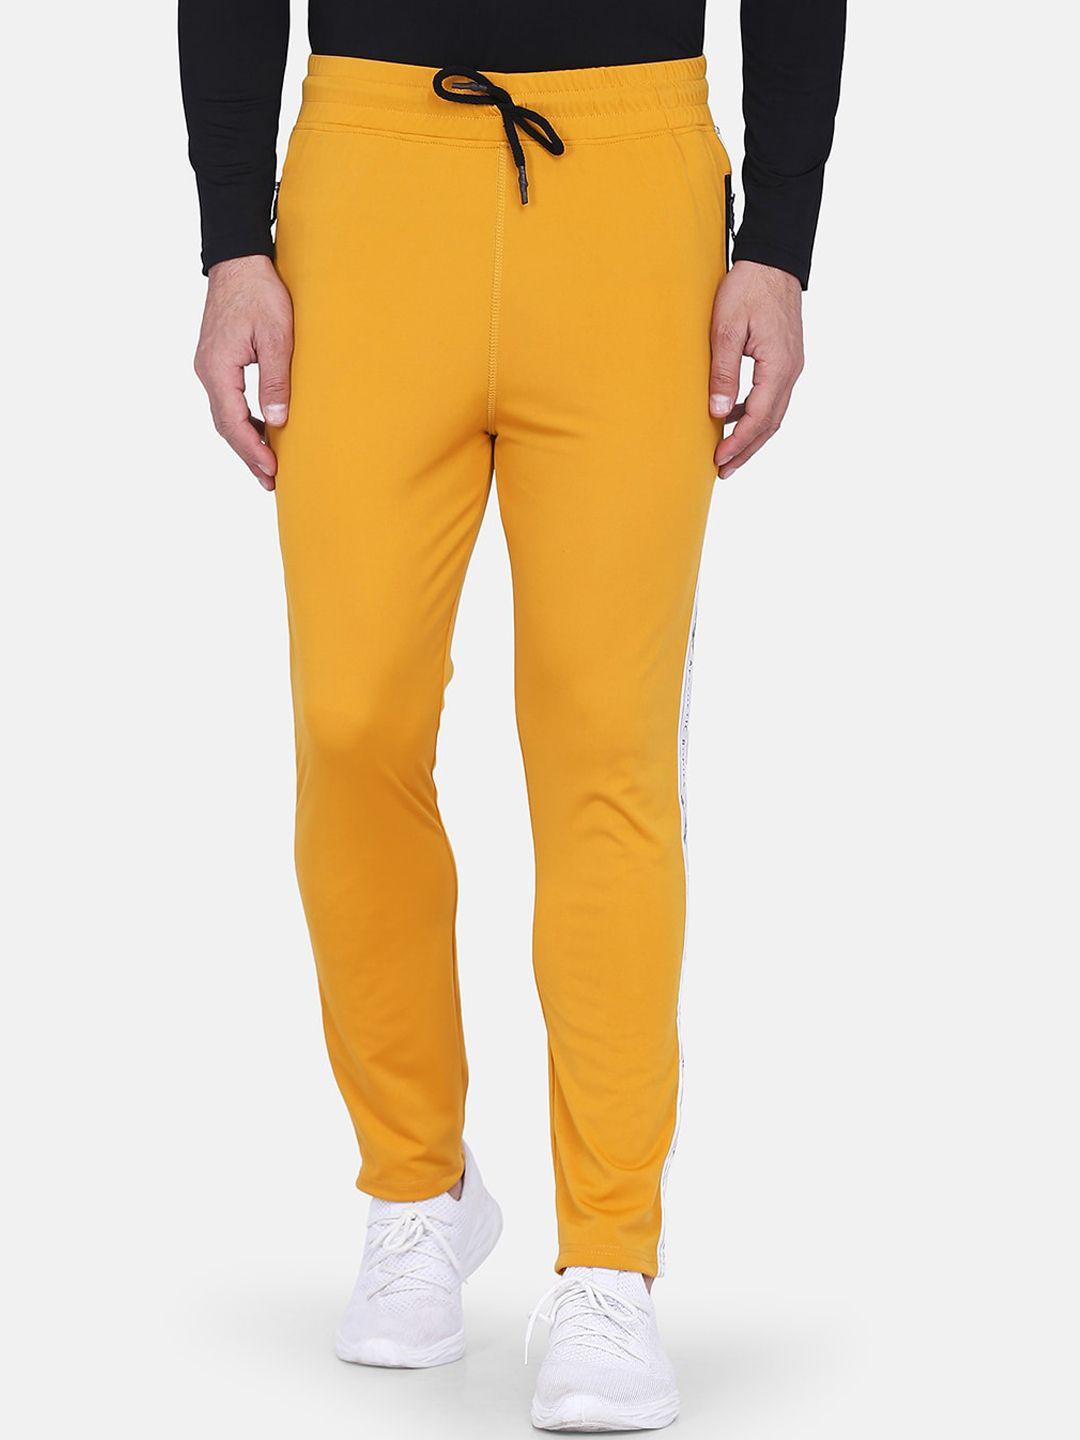 aesthetic bodies men mustard yellow solid track pants